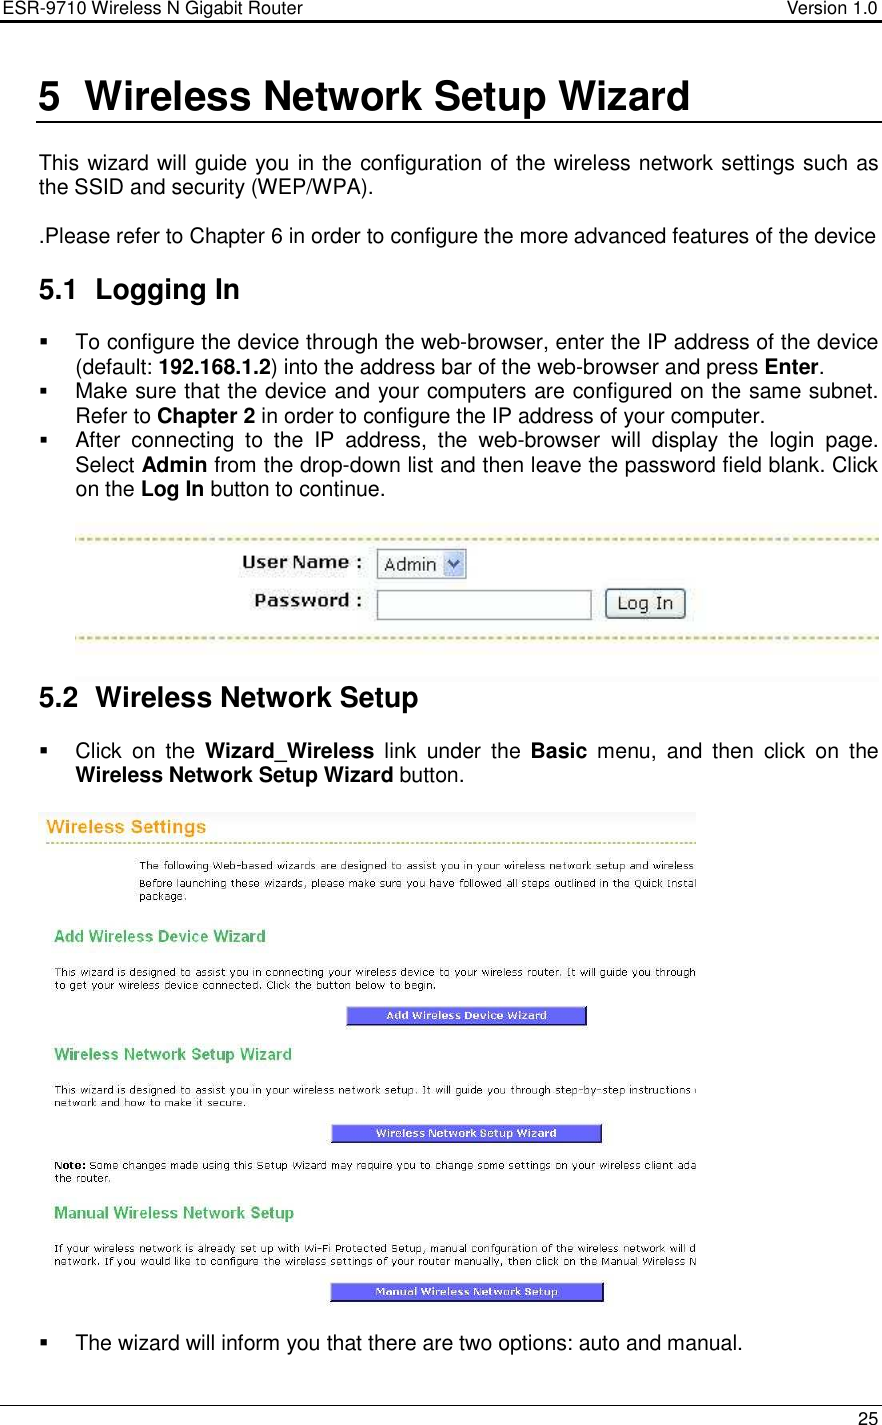 ESR-9710 Wireless N Gigabit Router                                    Version 1.0    25  5  Wireless Network Setup Wizard  This wizard will guide you in the configuration of the wireless network settings such as the SSID and security (WEP/WPA).    .Please refer to Chapter 6 in order to configure the more advanced features of the device  5.1  Logging In    To configure the device through the web-browser, enter the IP address of the device (default: 192.168.1.2) into the address bar of the web-browser and press Enter.   Make sure that the device and your computers are configured on the same subnet. Refer to Chapter 2 in order to configure the IP address of your computer.  After  connecting  to  the  IP  address,  the  web-browser  will  display  the  login  page. Select Admin from the drop-down list and then leave the password field blank. Click on the Log In button to continue.     5.2  Wireless Network Setup   Click  on  the  Wizard_Wireless  link  under  the  Basic  menu,  and  then  click  on  the Wireless Network Setup Wizard button.        The wizard will inform you that there are two options: auto and manual.  